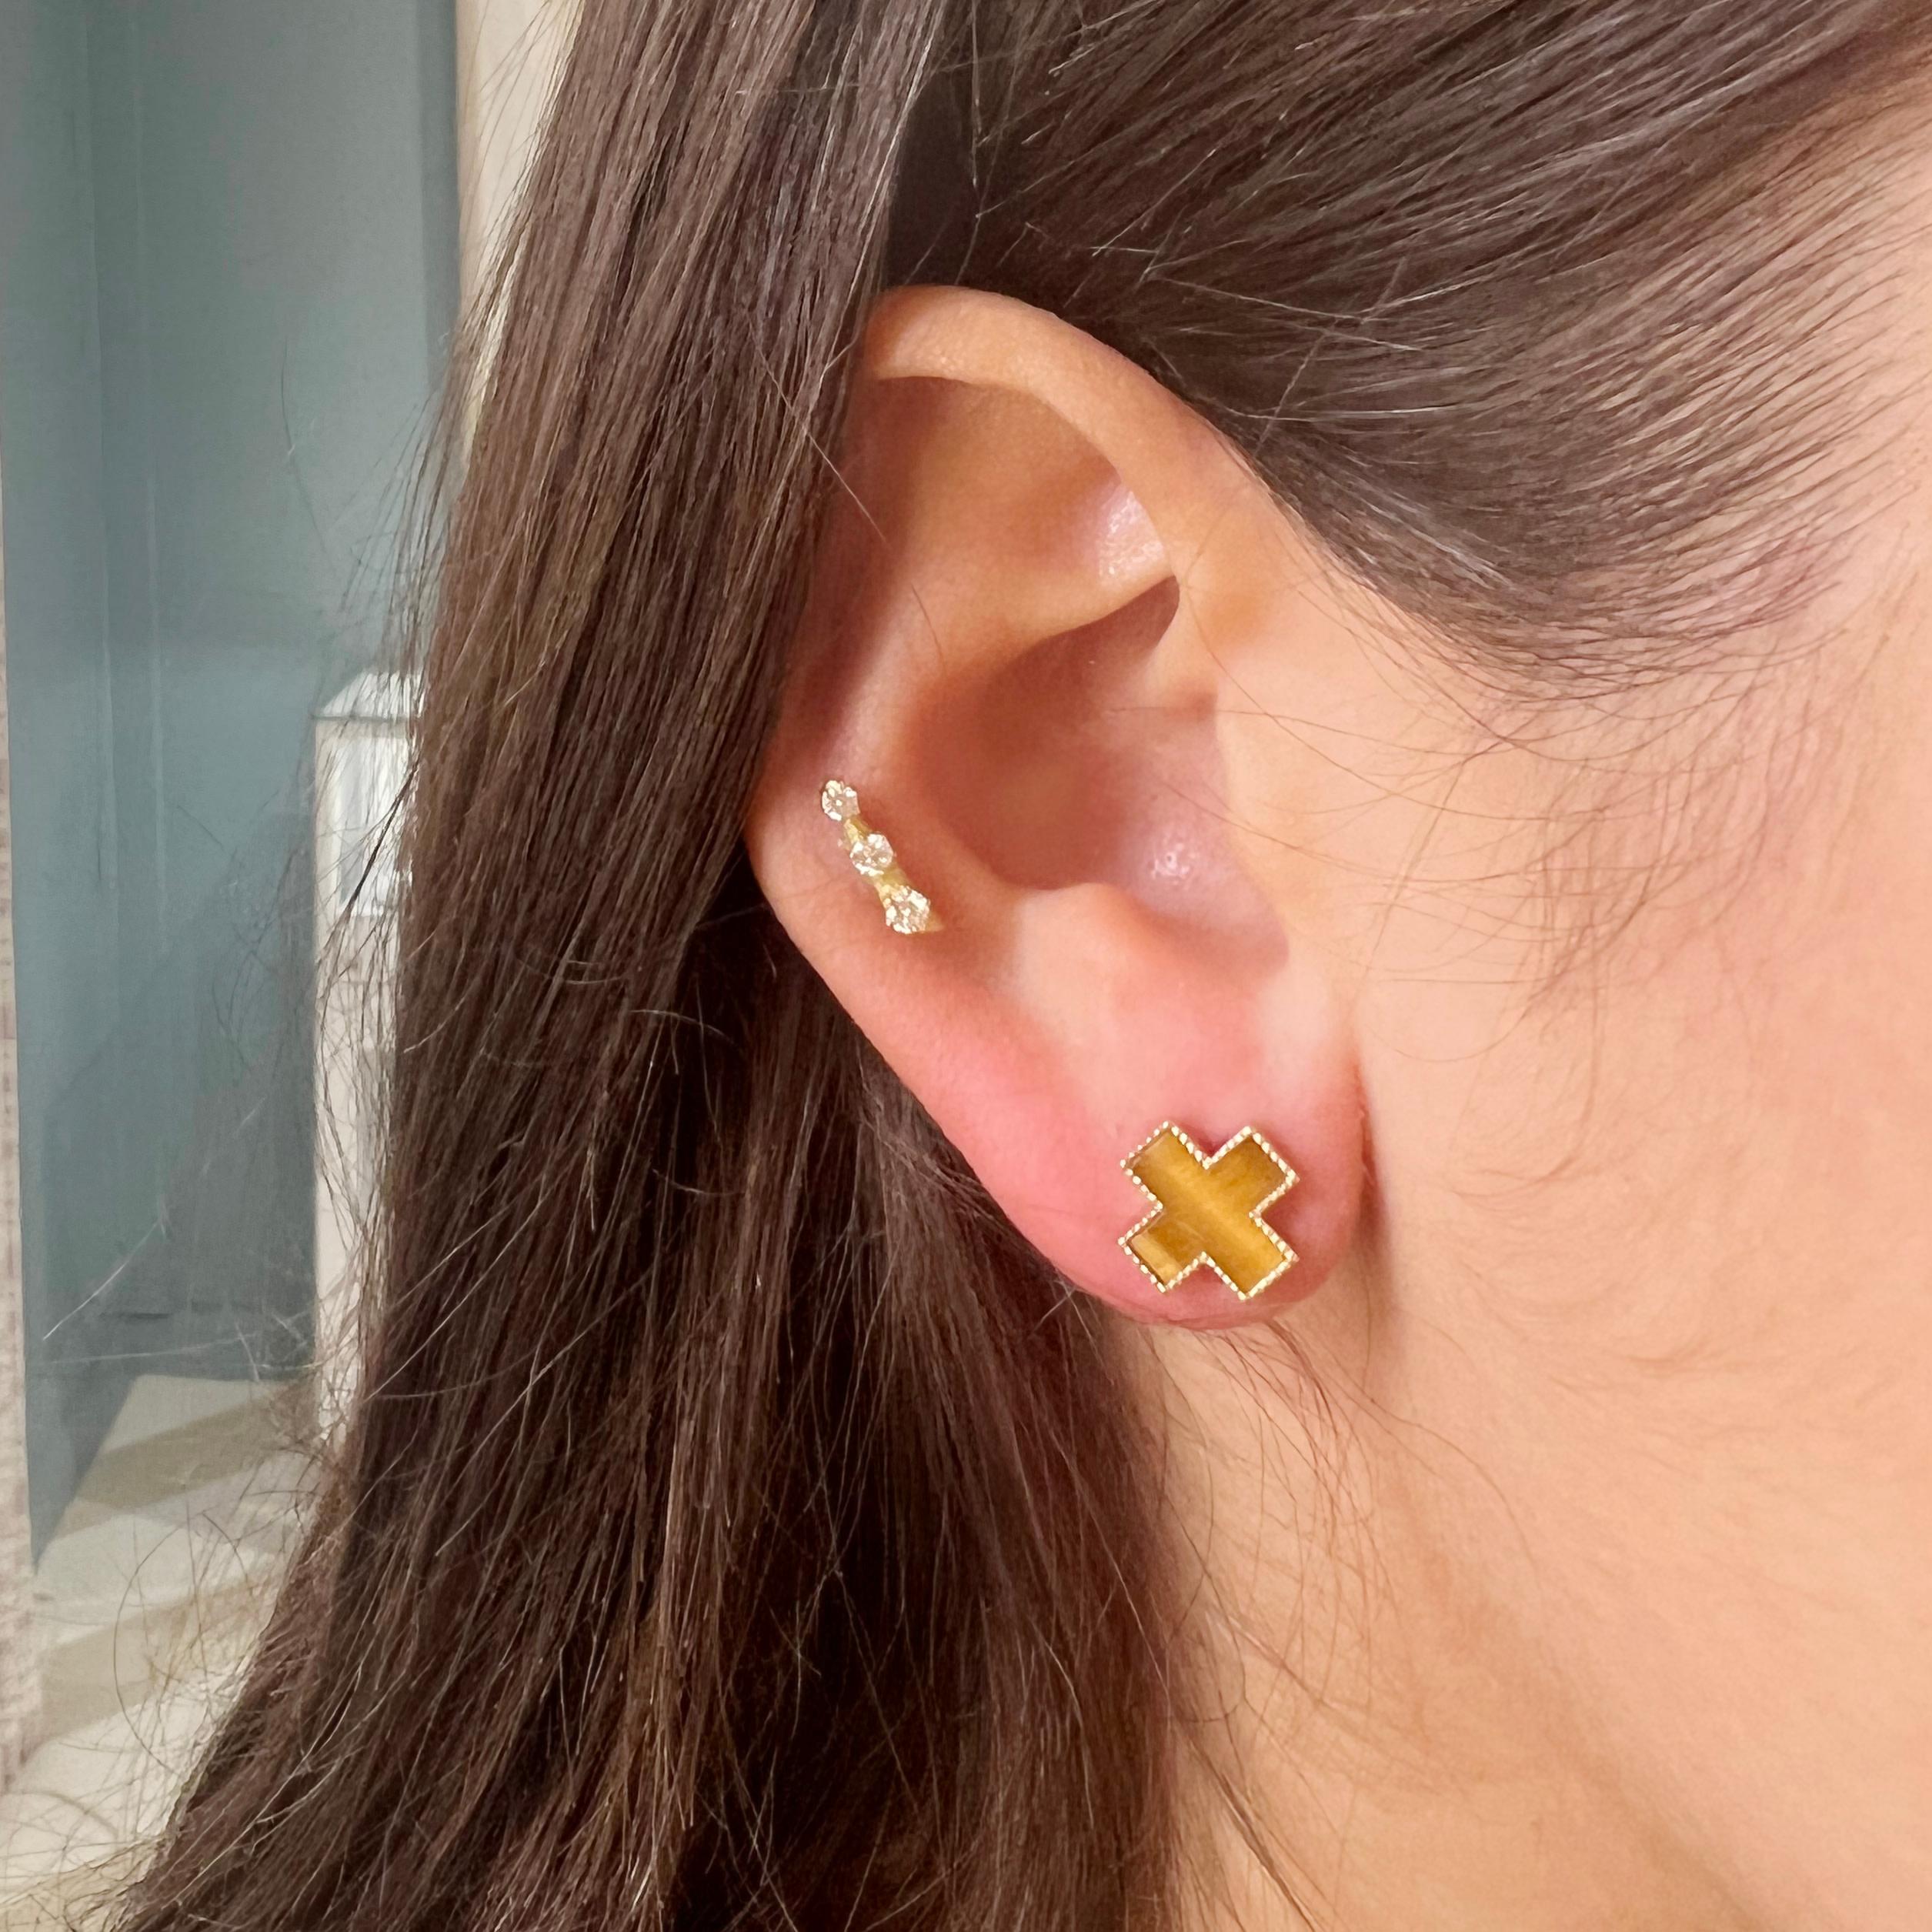 A twist on our best-selling Heirloom Stud Earrings, the Tigers Eye Inlay Heirloom Studs are a staple and make the perfect gift. These fun classics feature hand-cut tigers eye set in 14K yellow gold.

The GATES Collection by M. Flynn is a jewelry